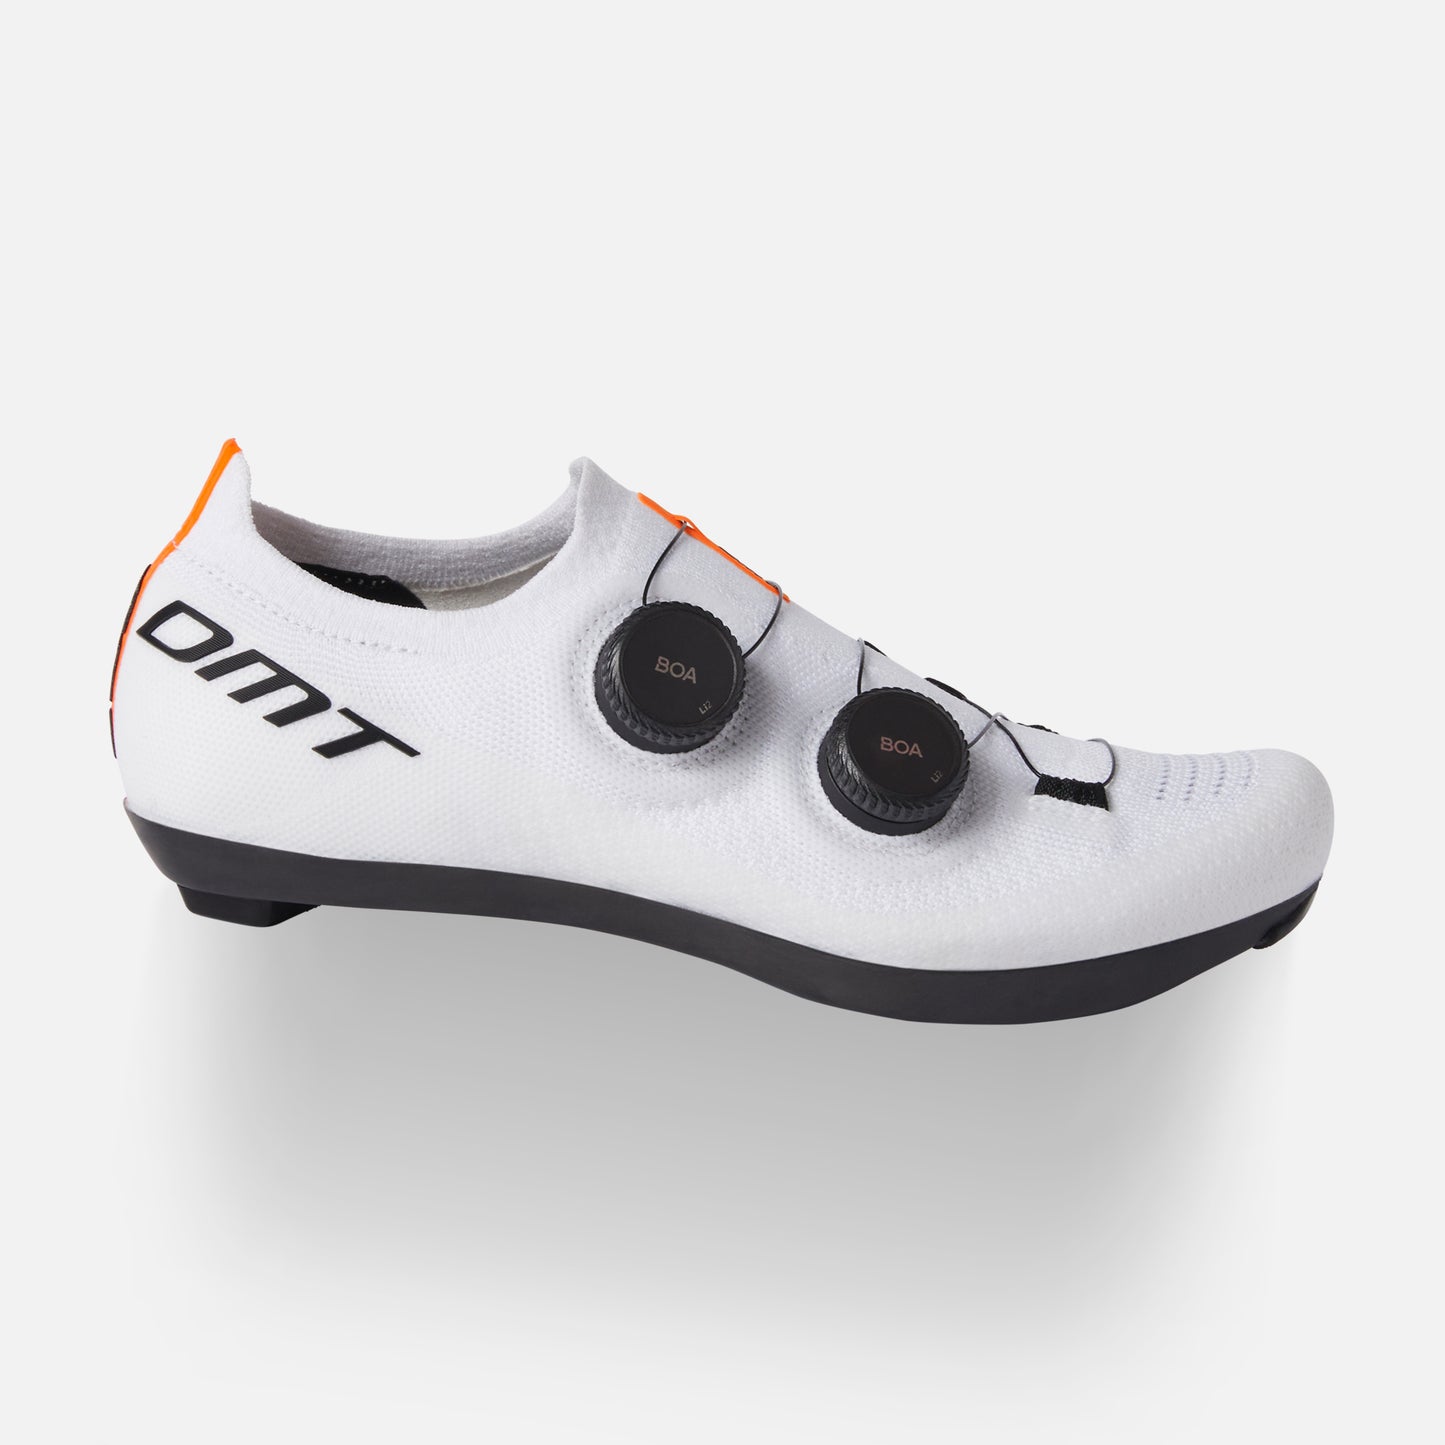 Maintenance and Care of DMT Cycling Shoes